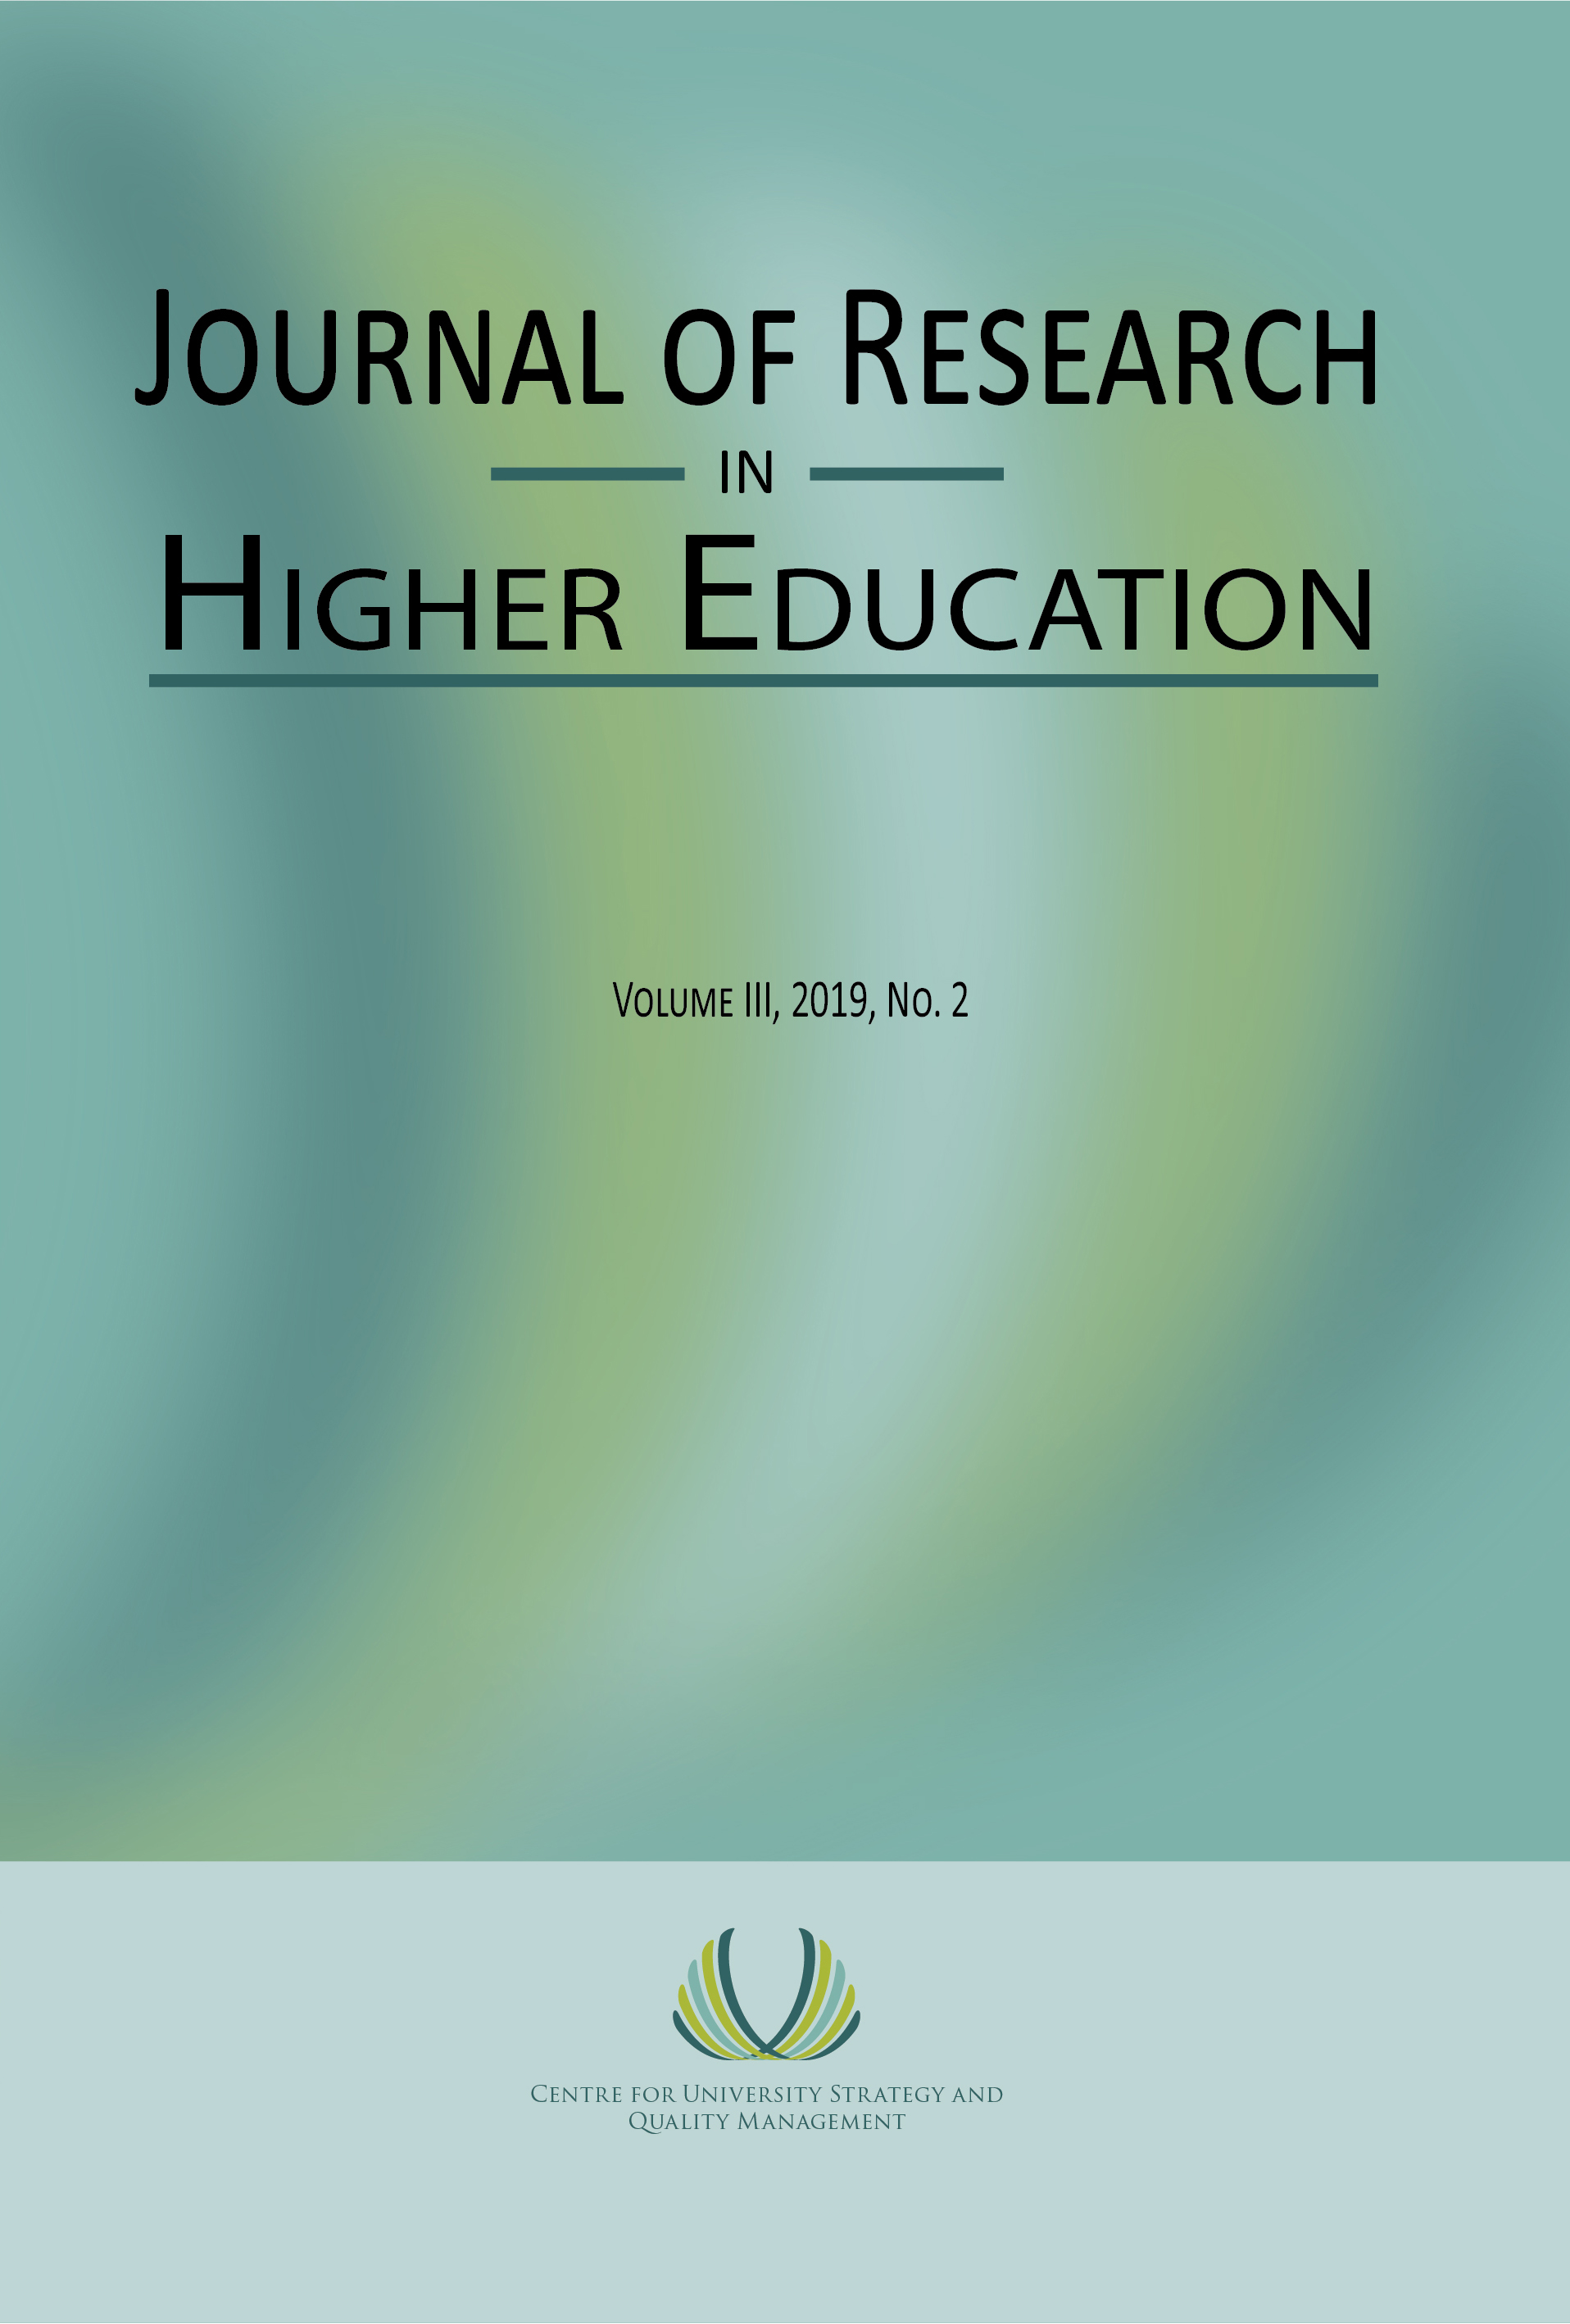 Knowledge of Human Resource Metrics and Engagement of Academic Staff of University of Lagos